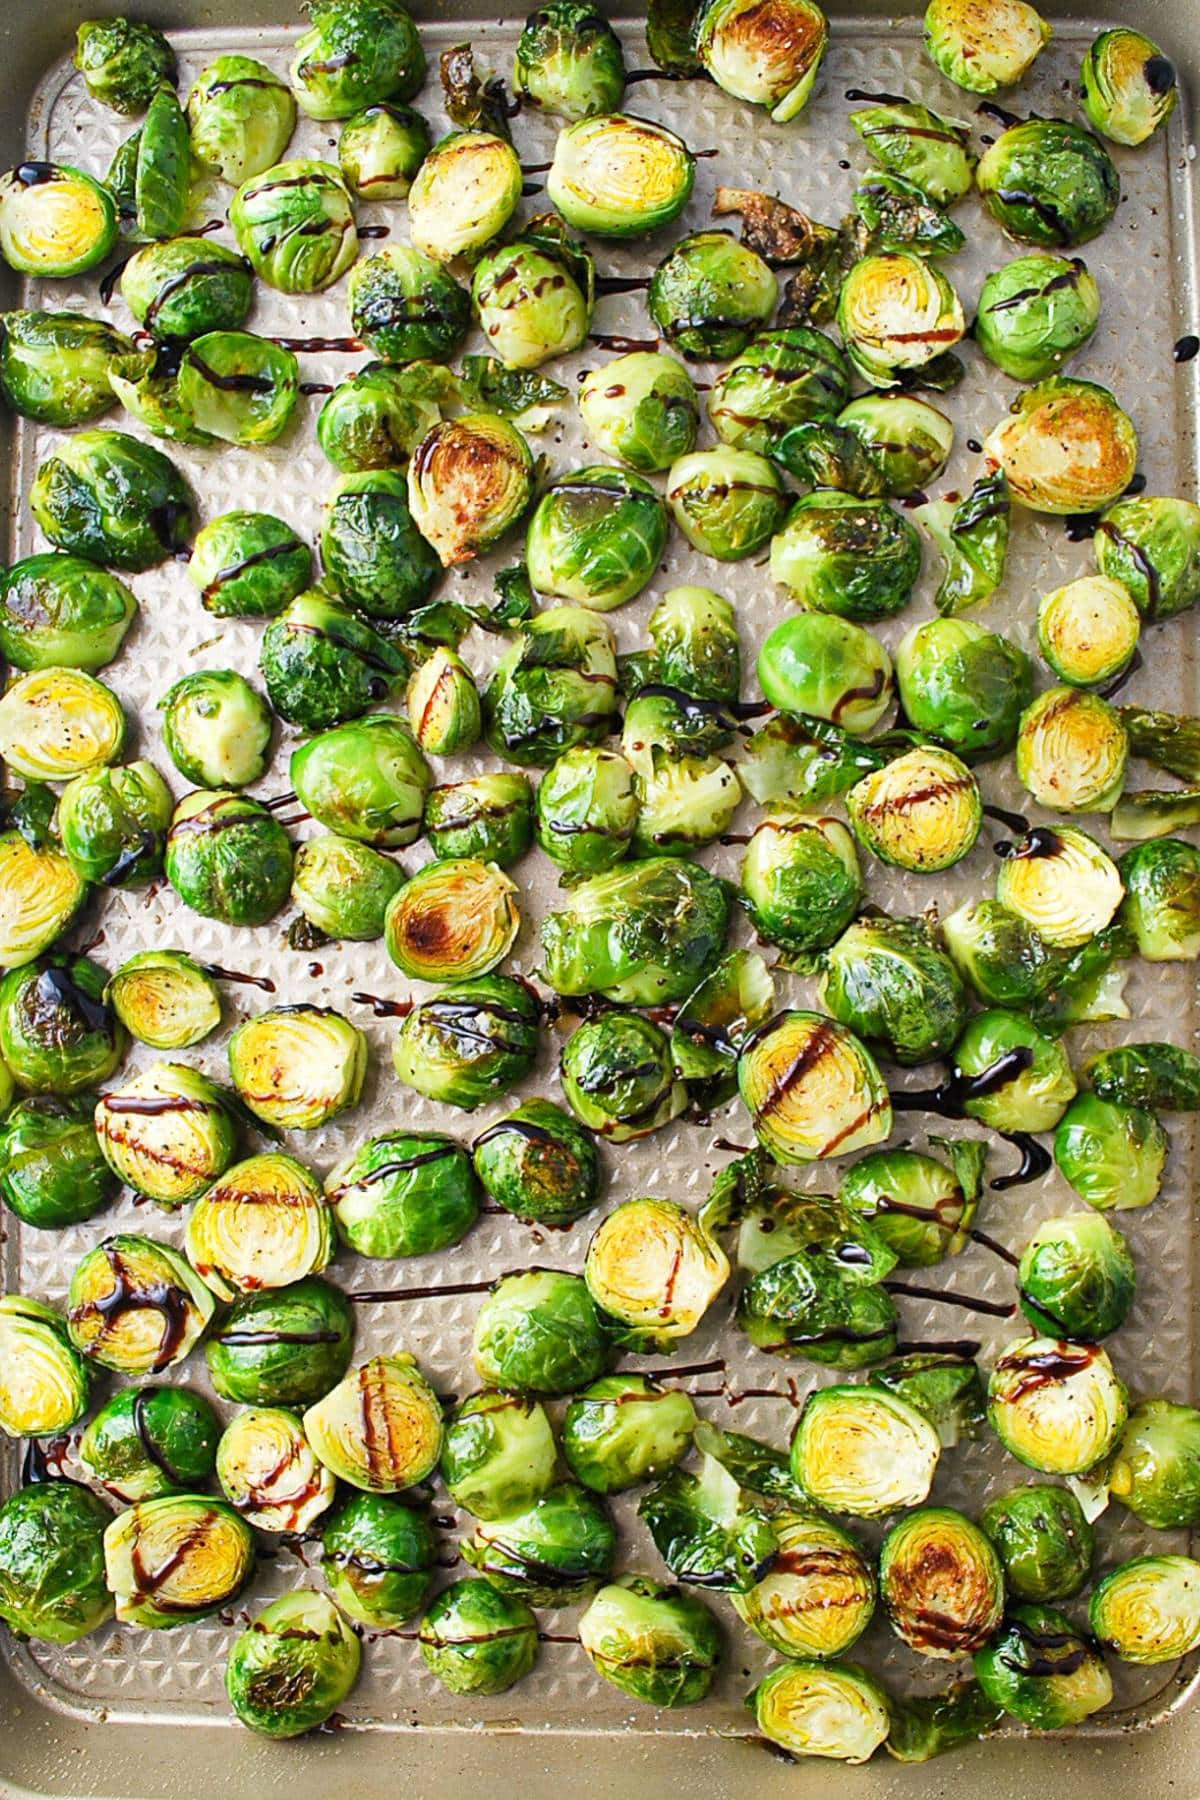 brussels sprouts drizzled with balsamic vinegar on a baking sheet